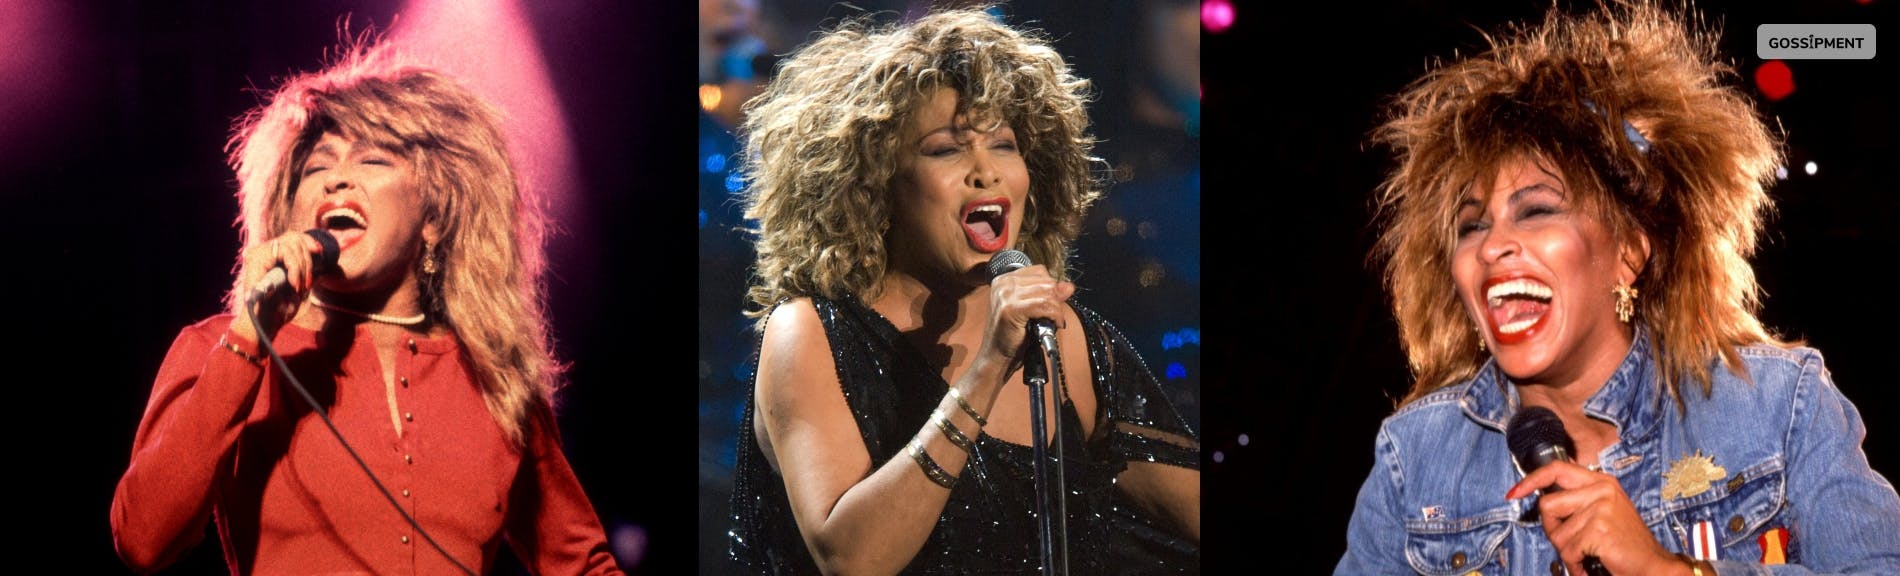 Cover Image for Queen Of Rock ‘n’ Roll’ Tina Turner Dies At 83 After Long Illness